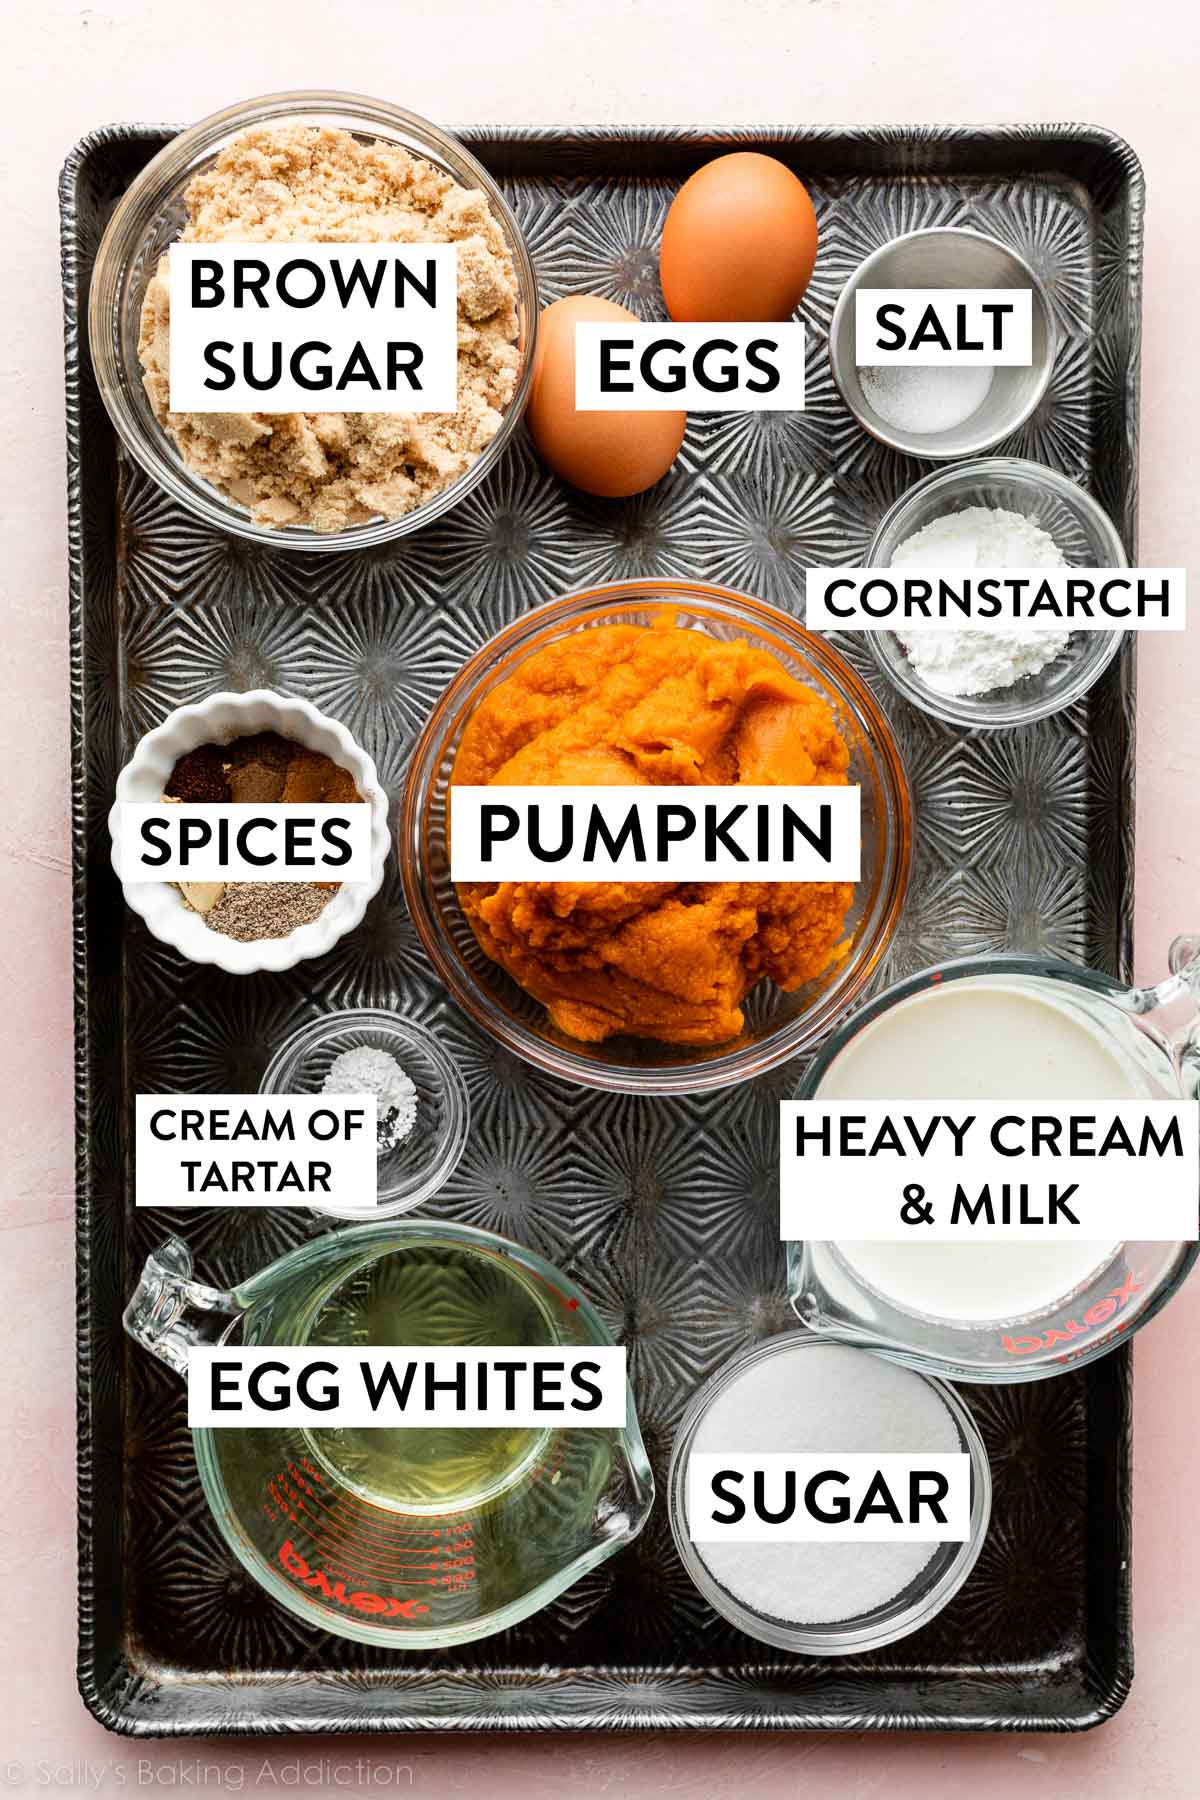 ingredients on baking sheet including pumpkin, heavy cream, milk, brown sugar, eggs, and spices.